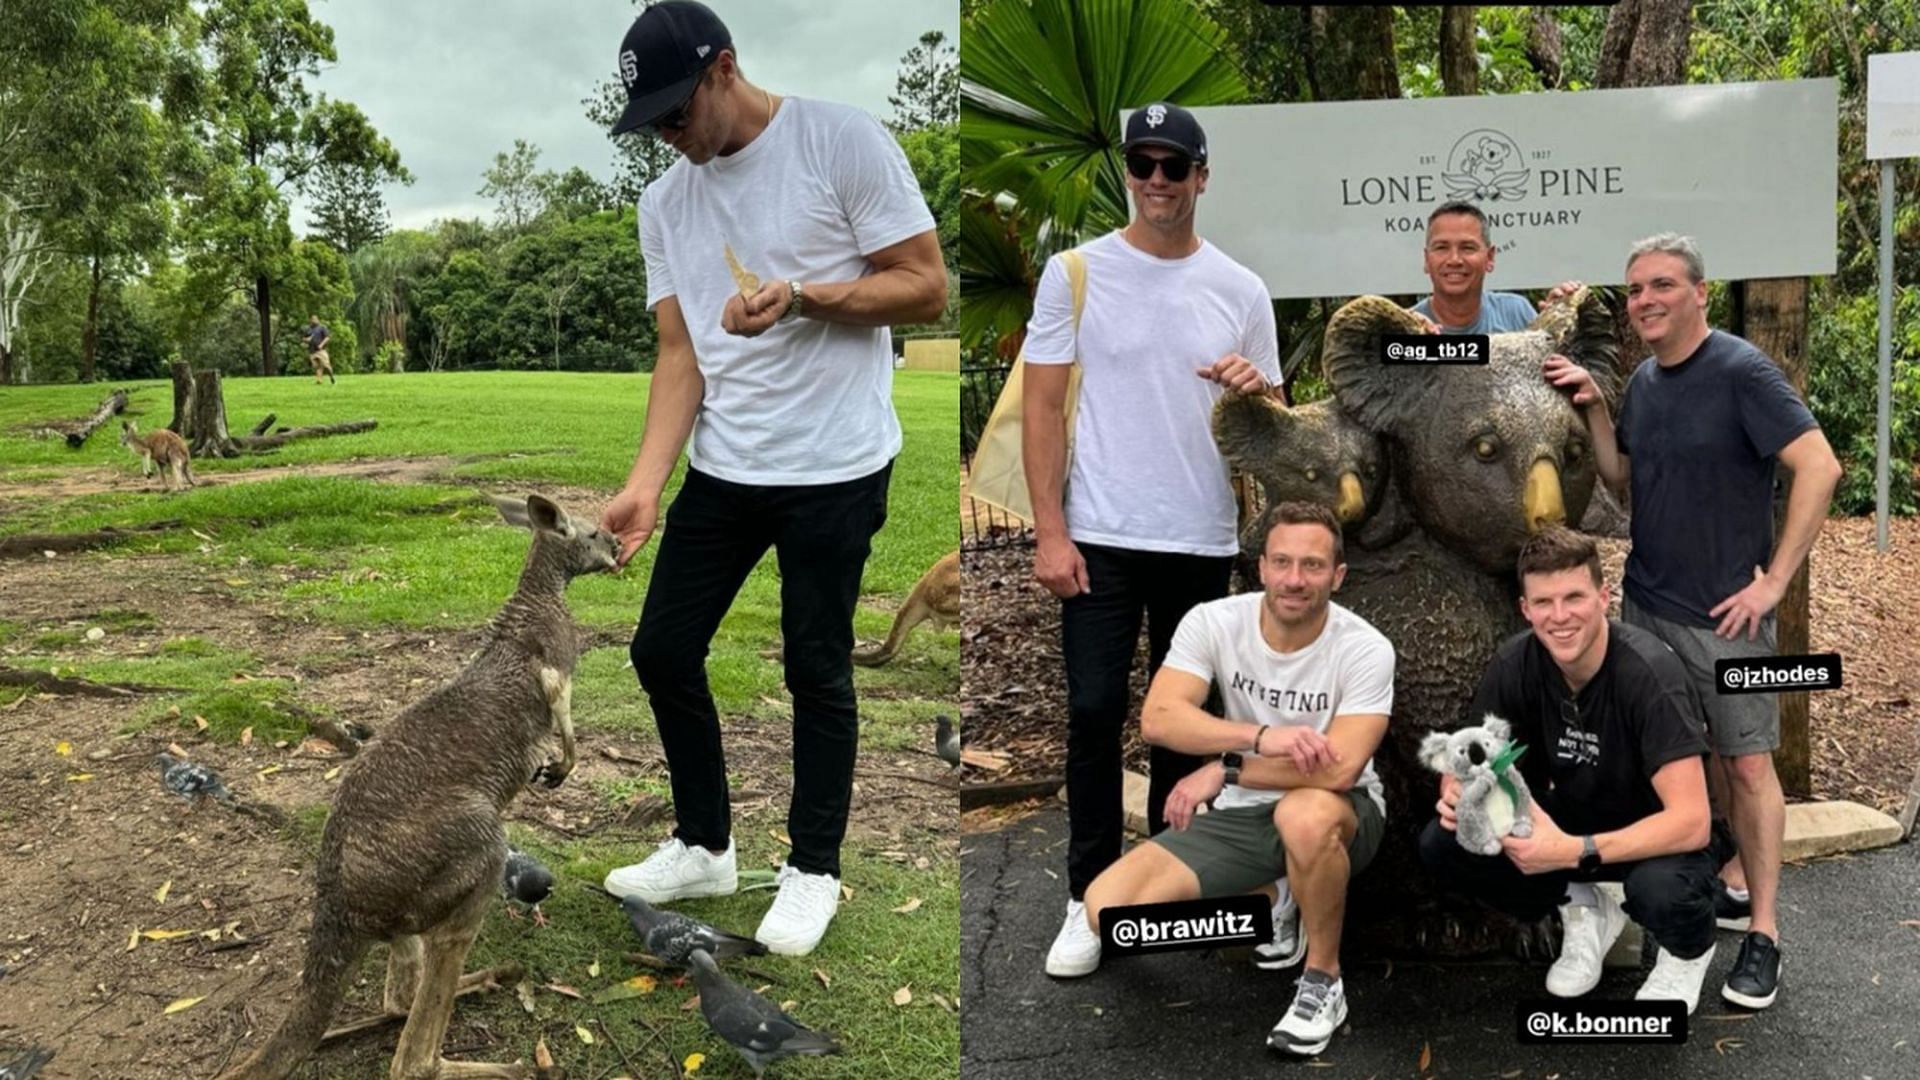 Tom Brady, Alex Guerrero, and their friends at a nature park in Australia